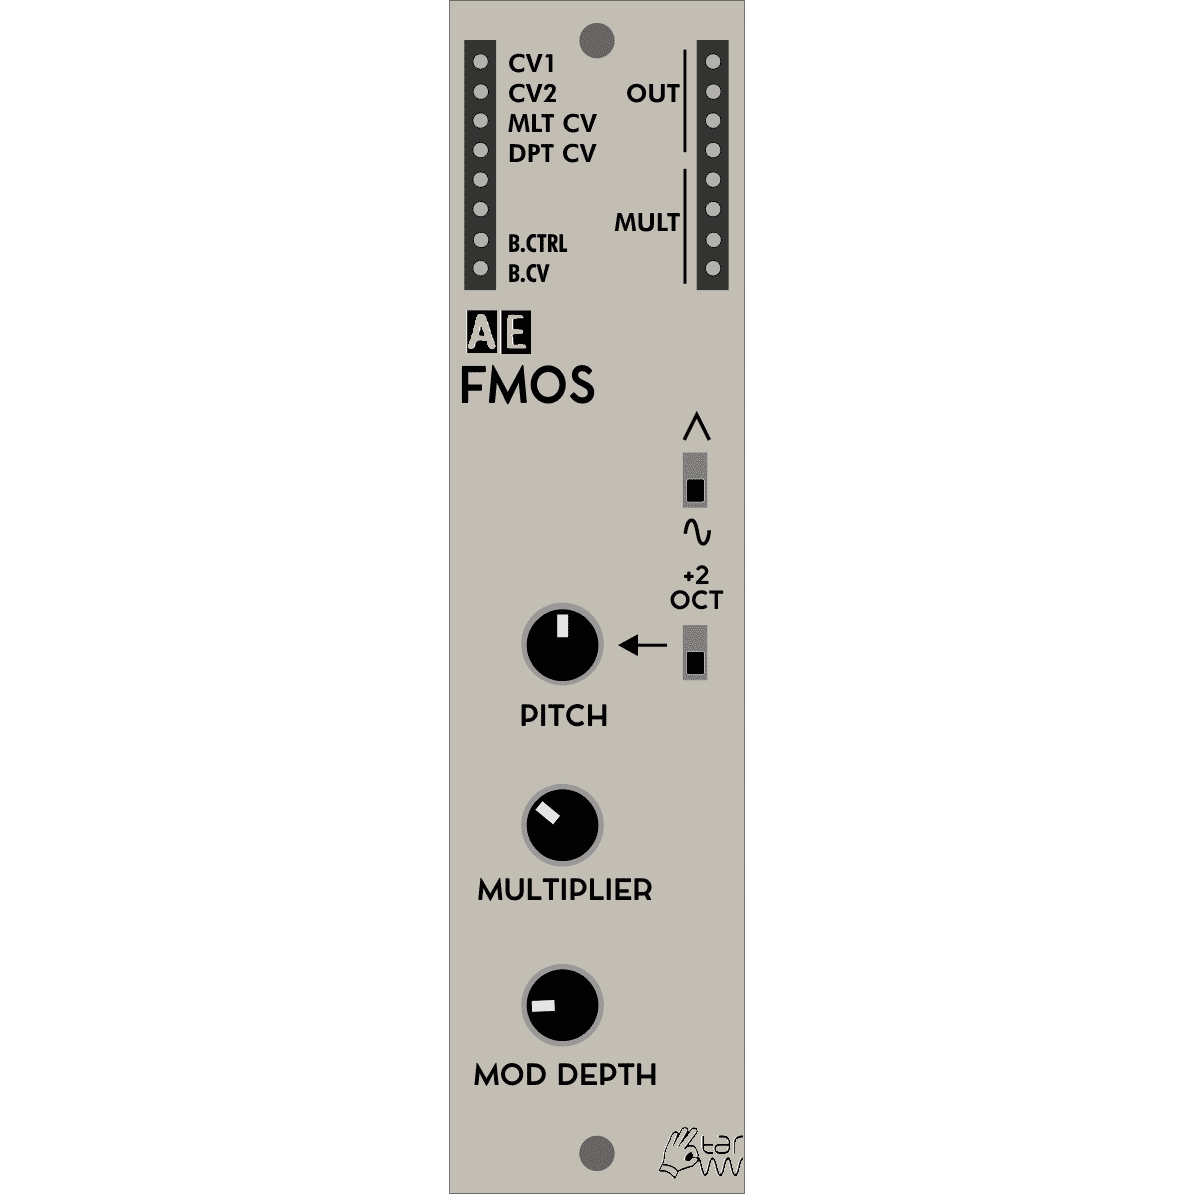 FMOS Module – FM synthesis for the AE Modular